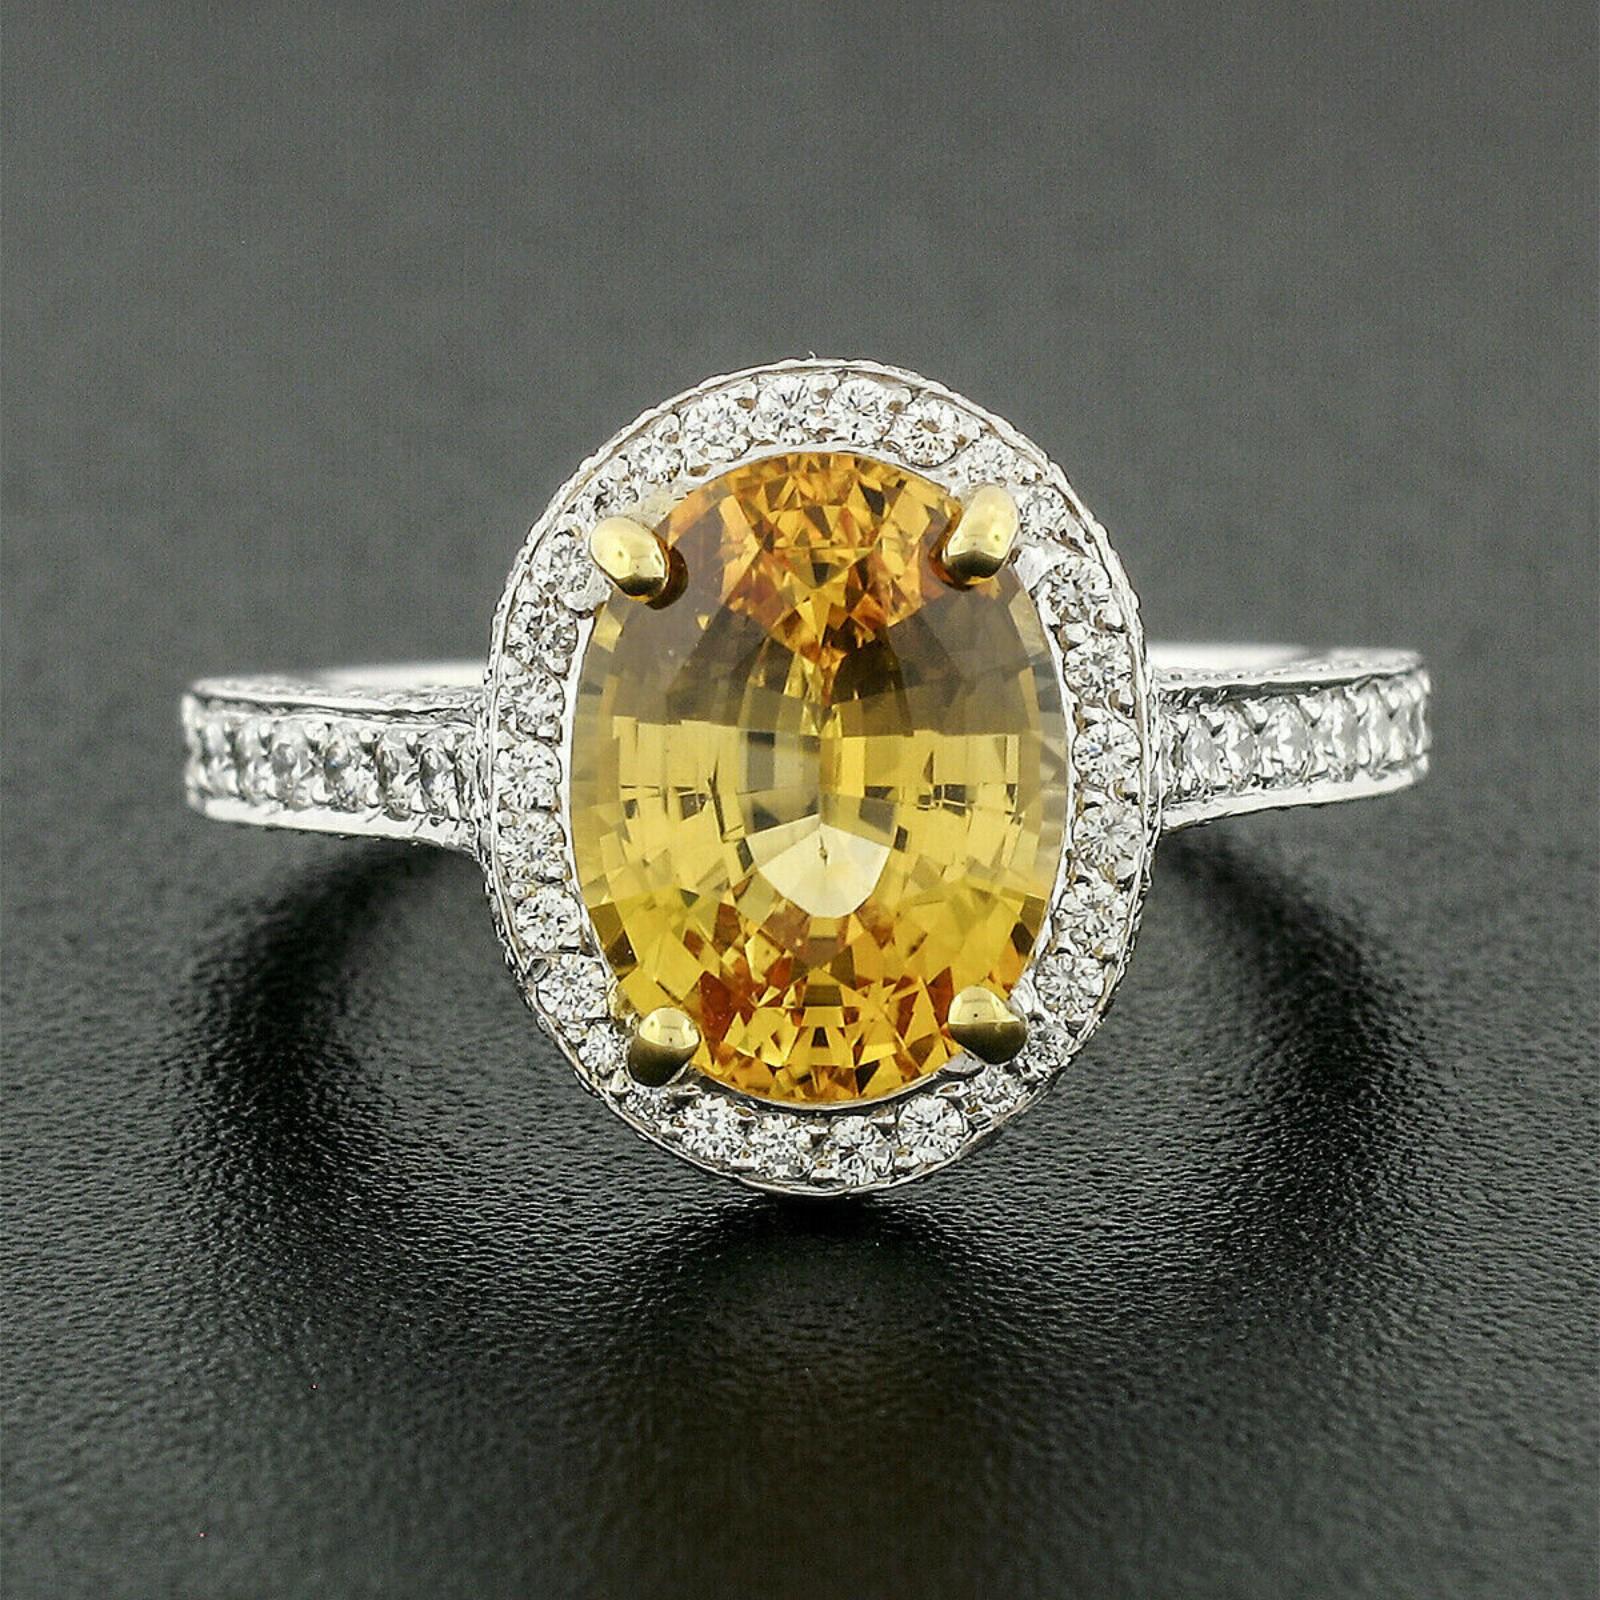 This magnificent yellow sapphire and diamond ring is crafted in solid platinum and features a GIA certified oval brilliant cut natural yellow sapphire. The 4.22 carats Ceylon sapphire solitaire sits at the center of a fancy halo design, floating